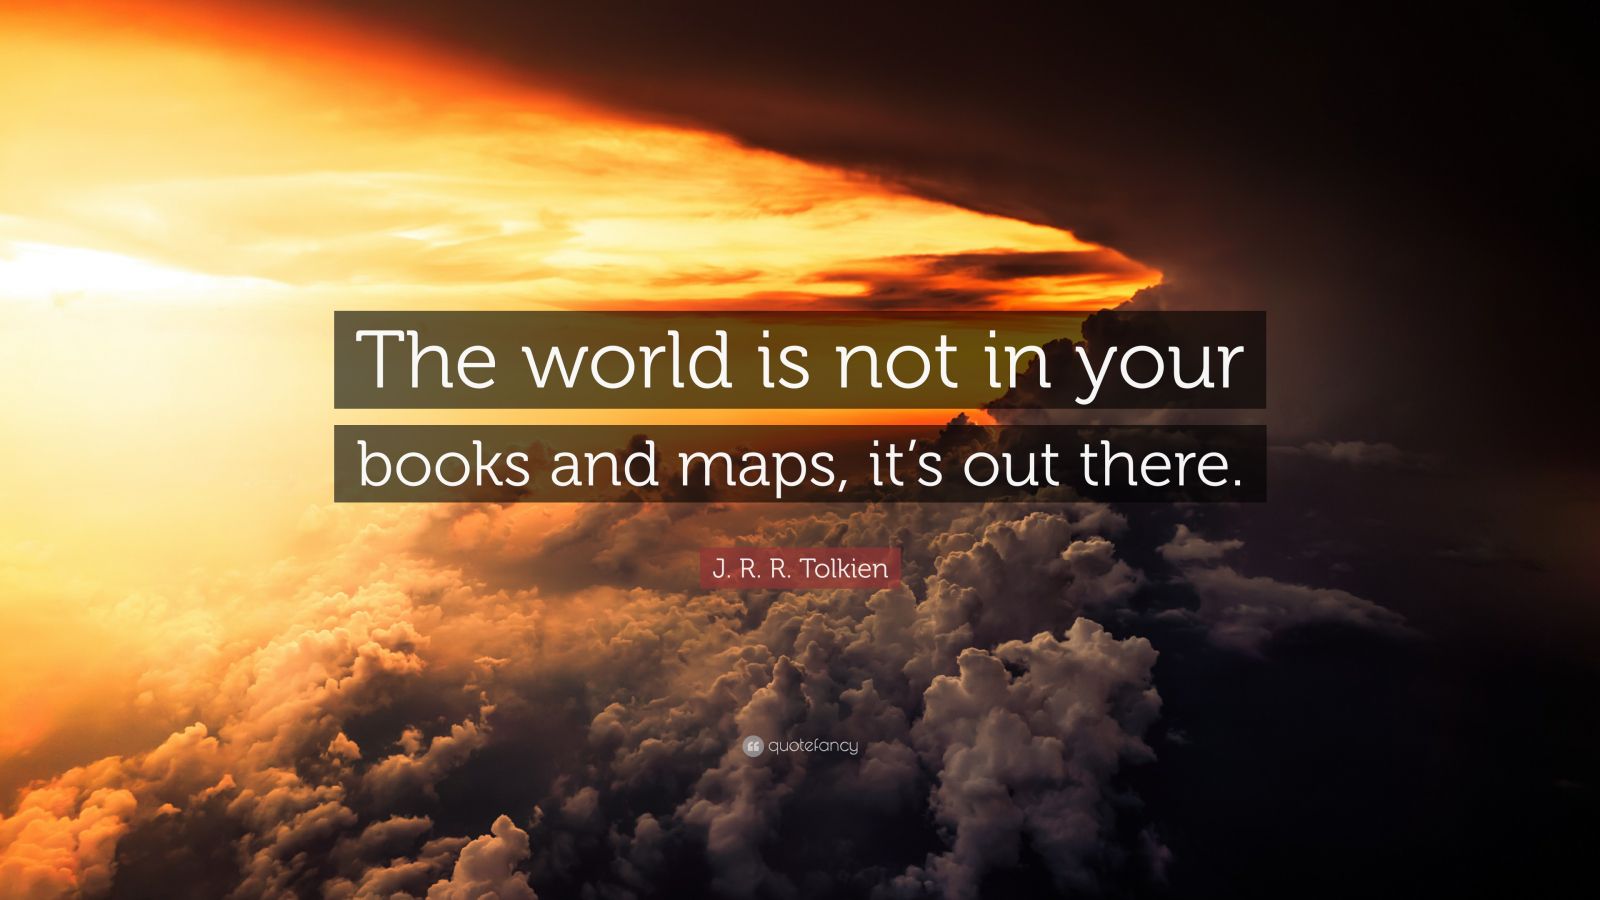 J. R. R. Tolkien Quote: “The world is not in your books and maps, it’s